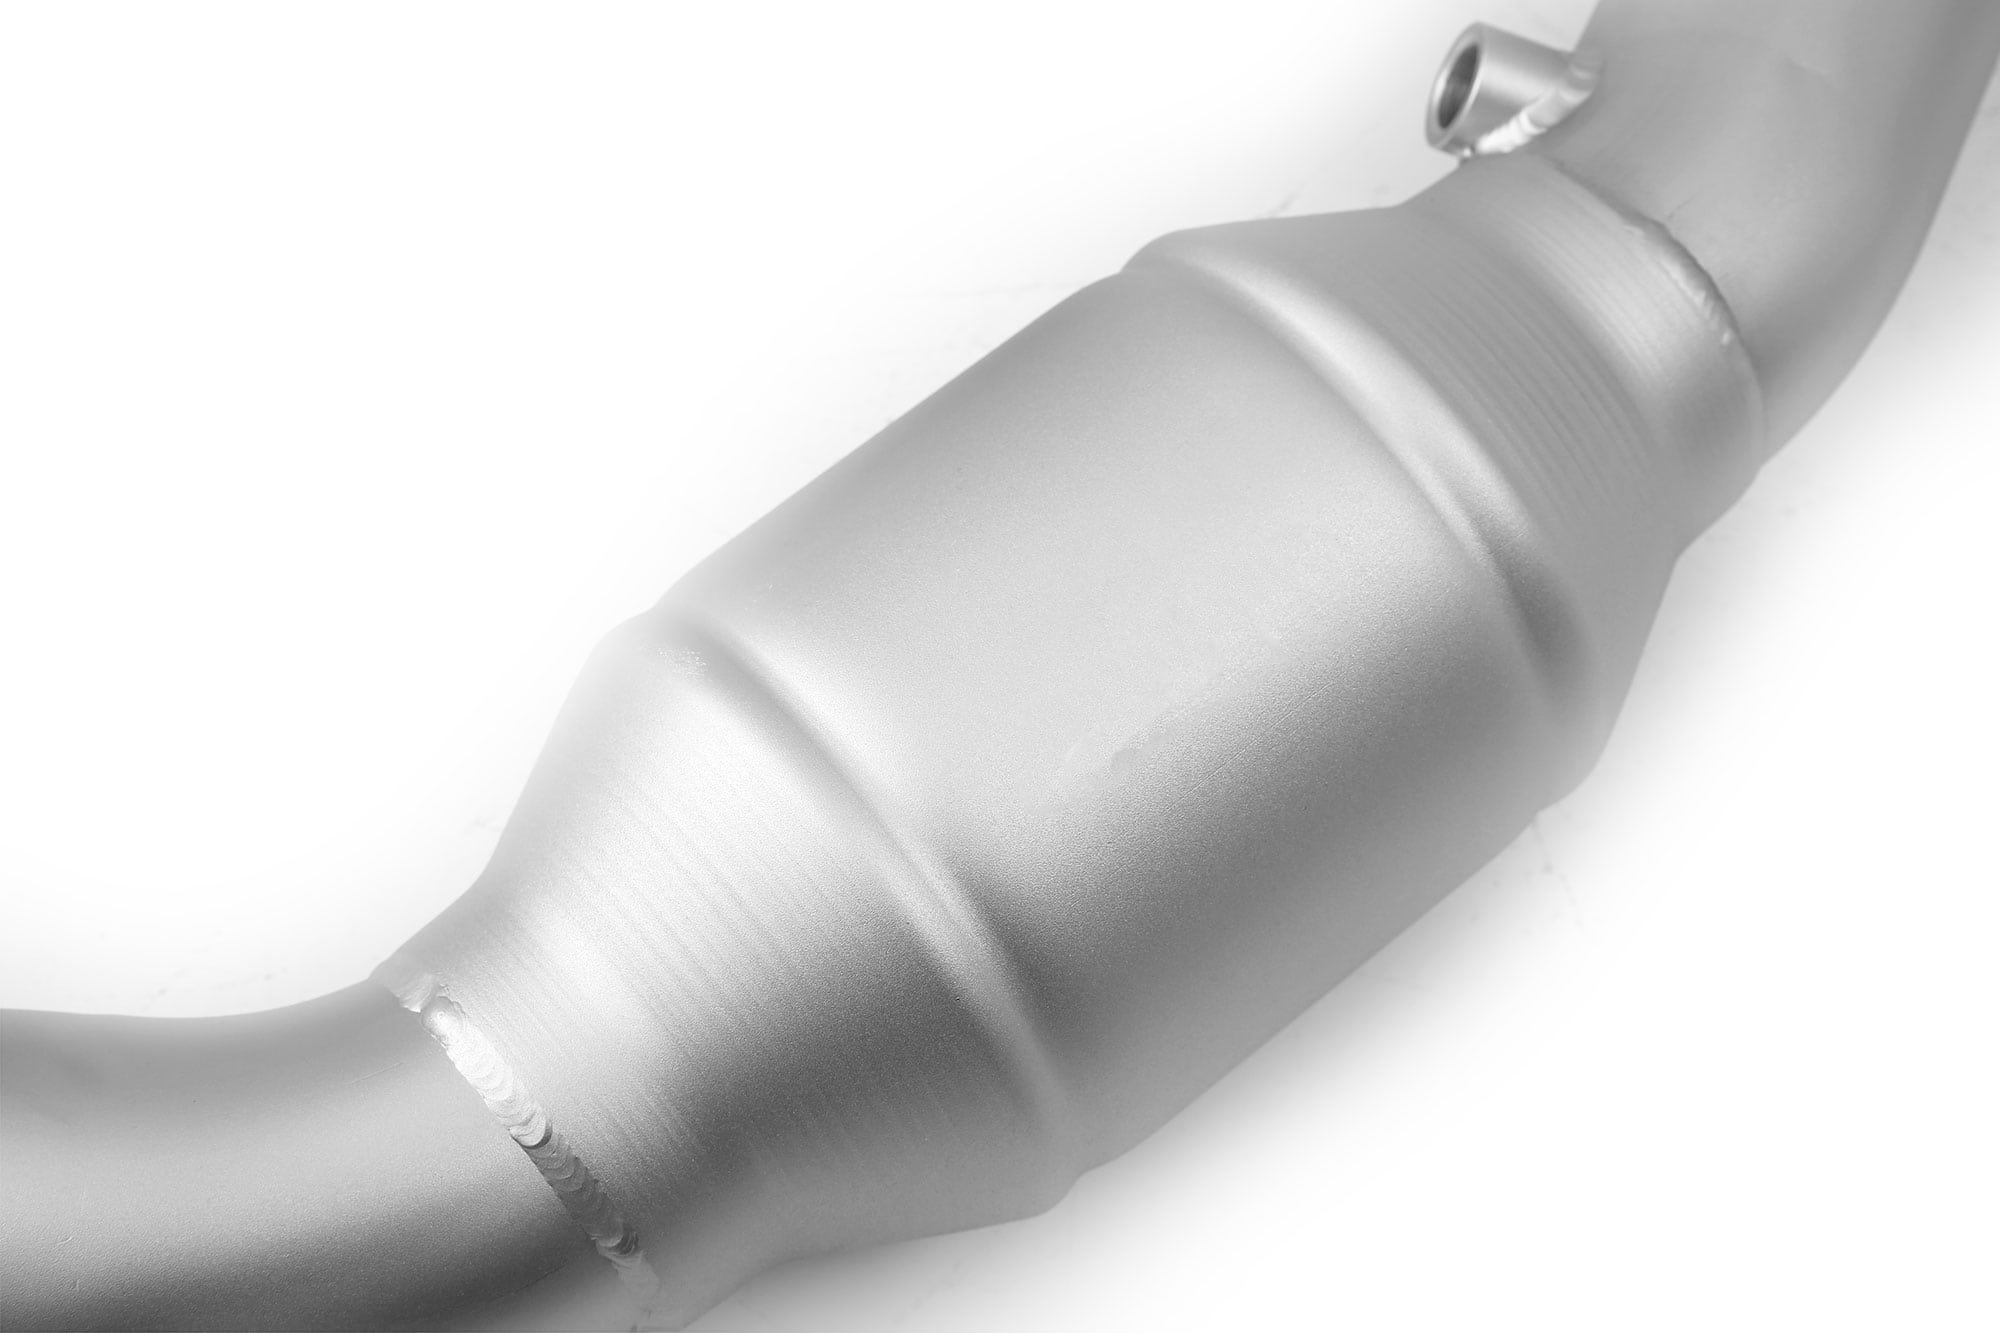 F-150 EcoBoost DownpipeHigh flow catalytic converter